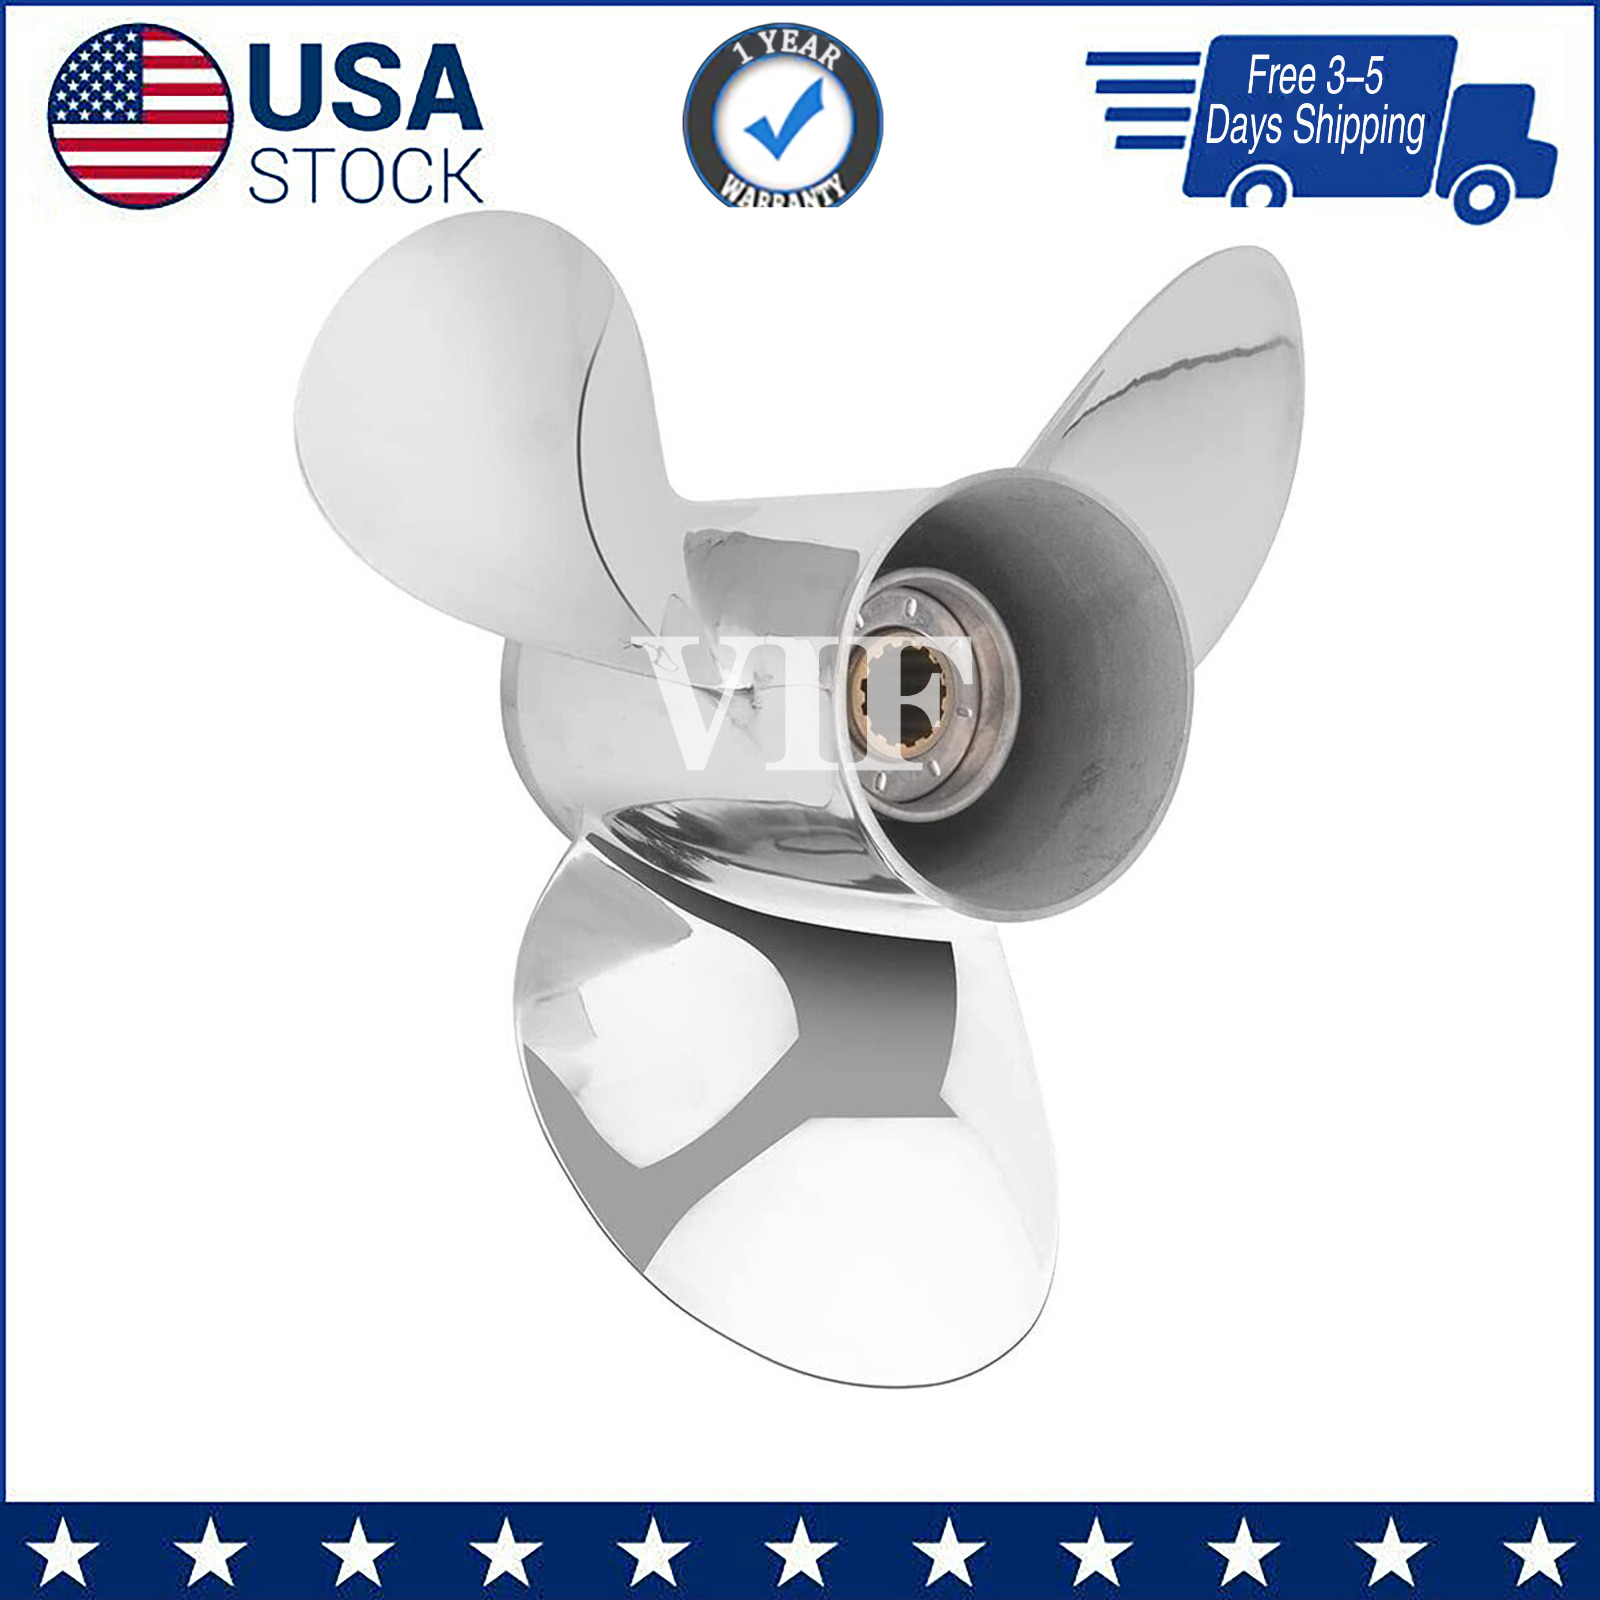 11 1/8 x 14 Stainless Outboard Propeller fit Yamaha Engines 40-60HP,13 Tooth,RH